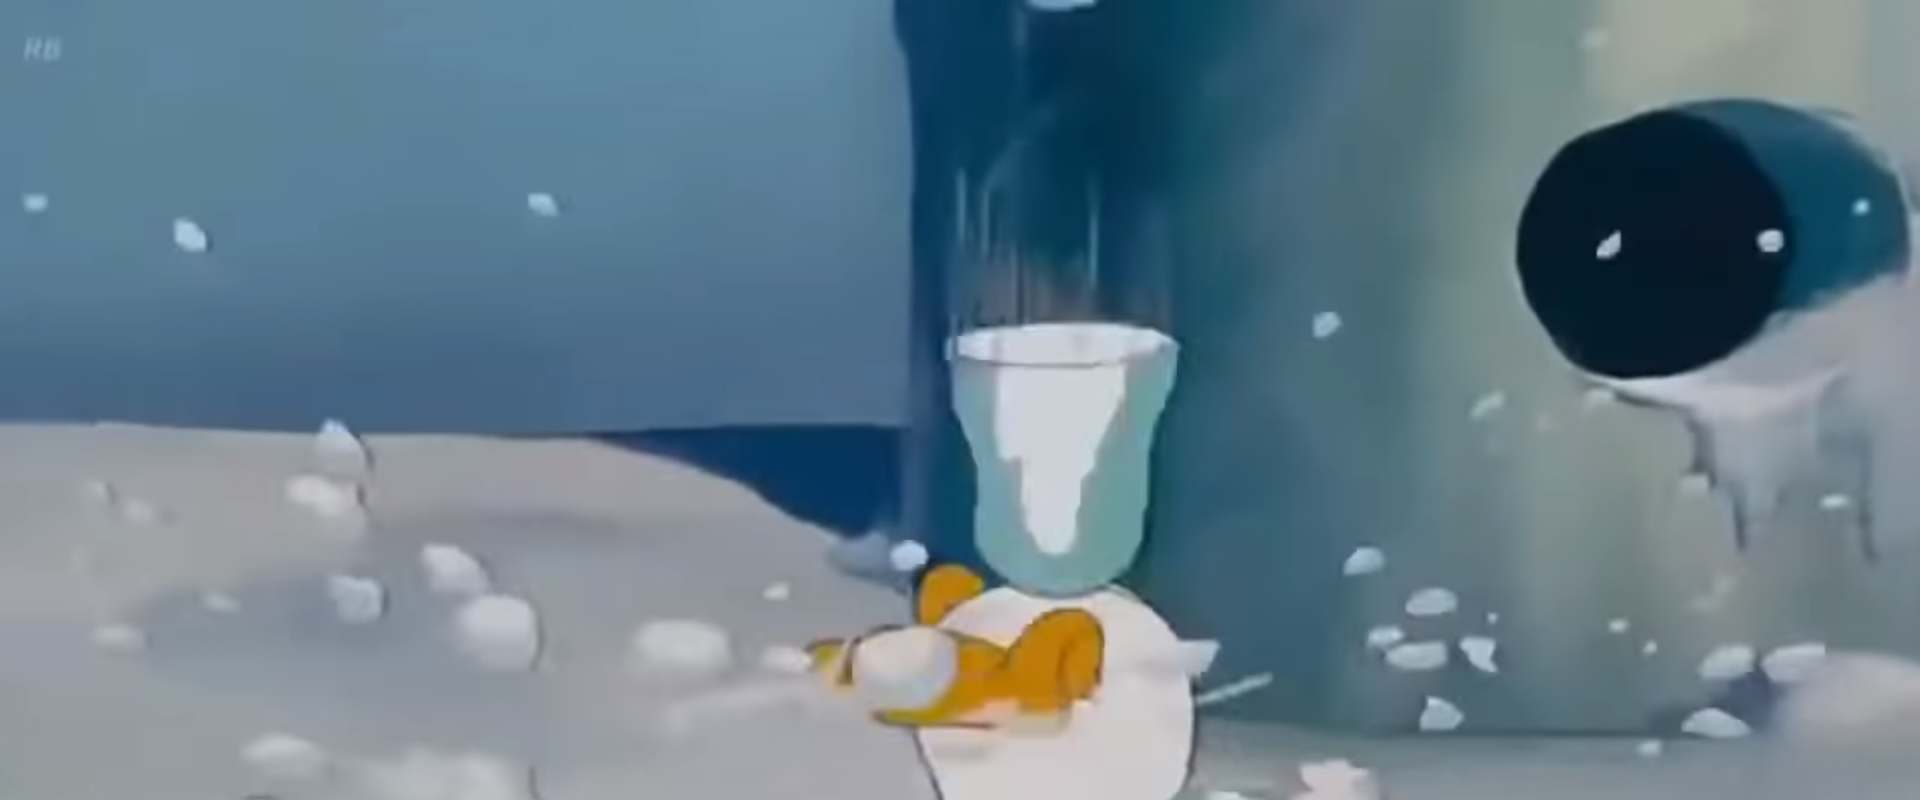 Donald's Snow Fight background 1